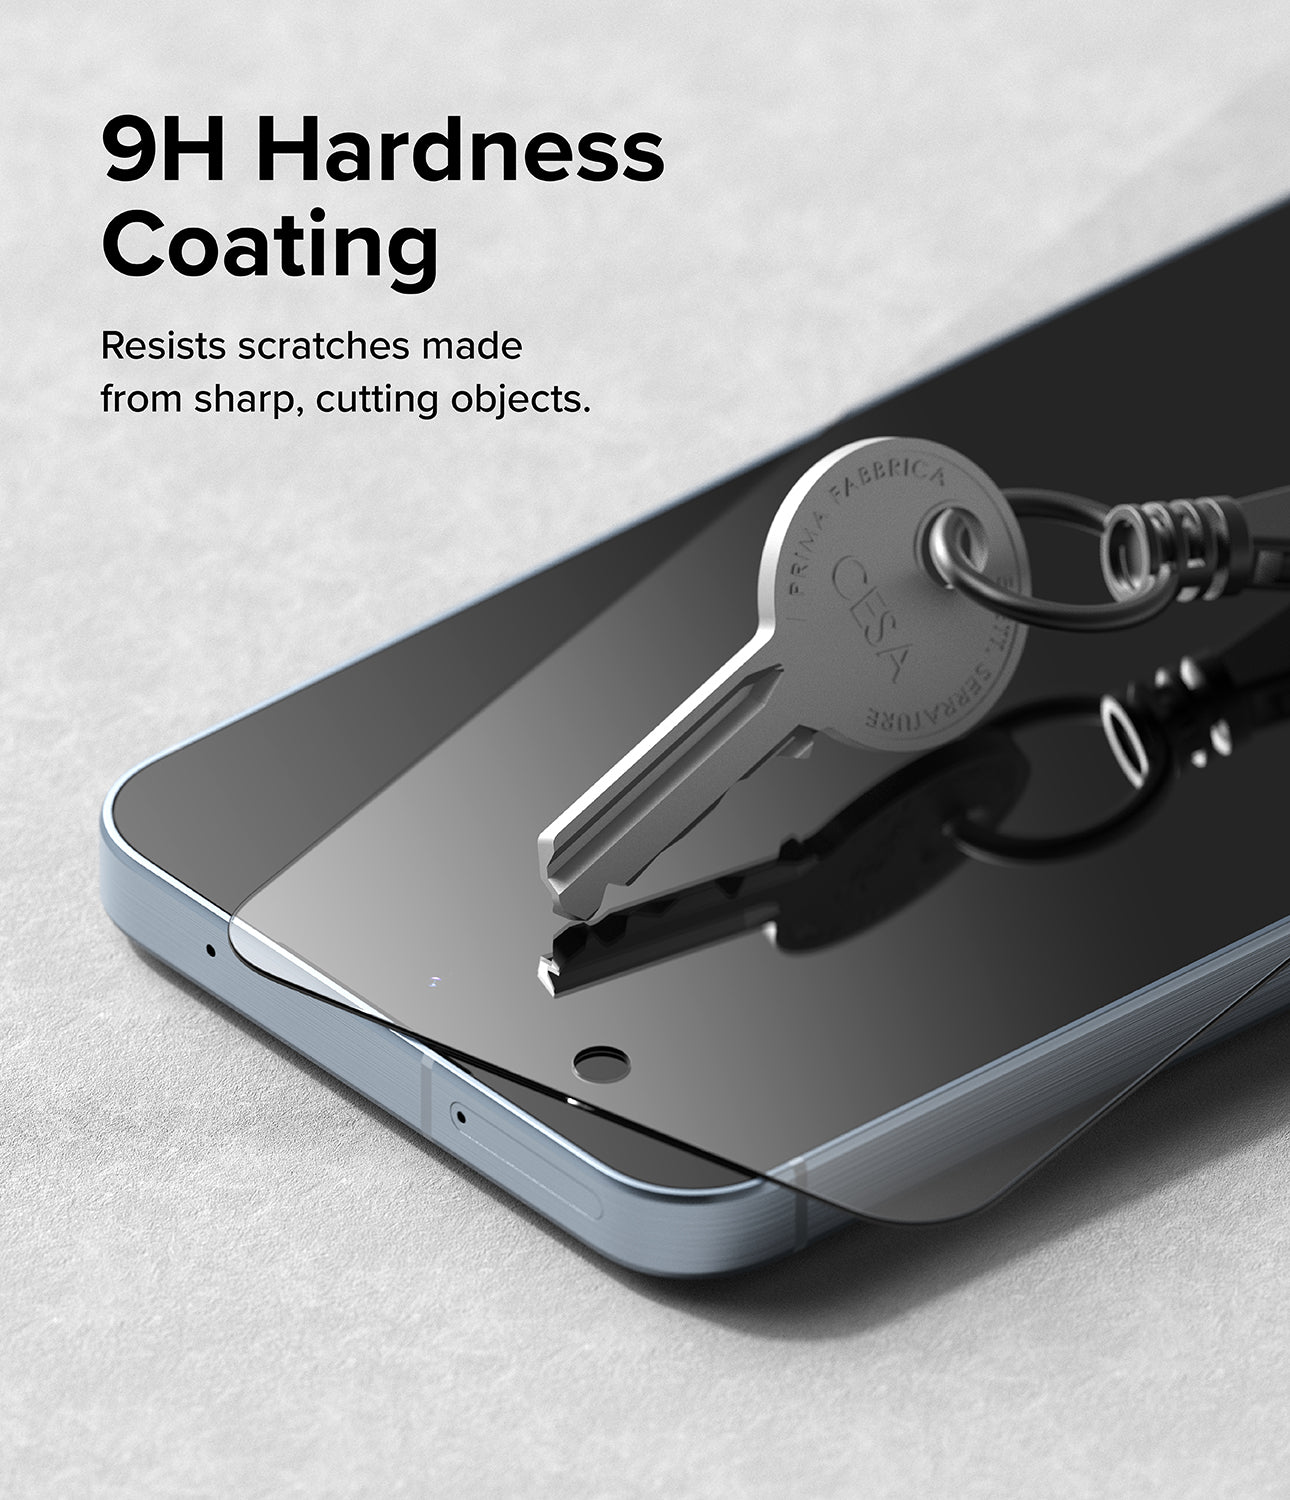 Galaxy A55 Screen Protector | Easy Slide Tempered Glass - 9H Hardness Coating. Resists scratches made from sharp, cutting objects.